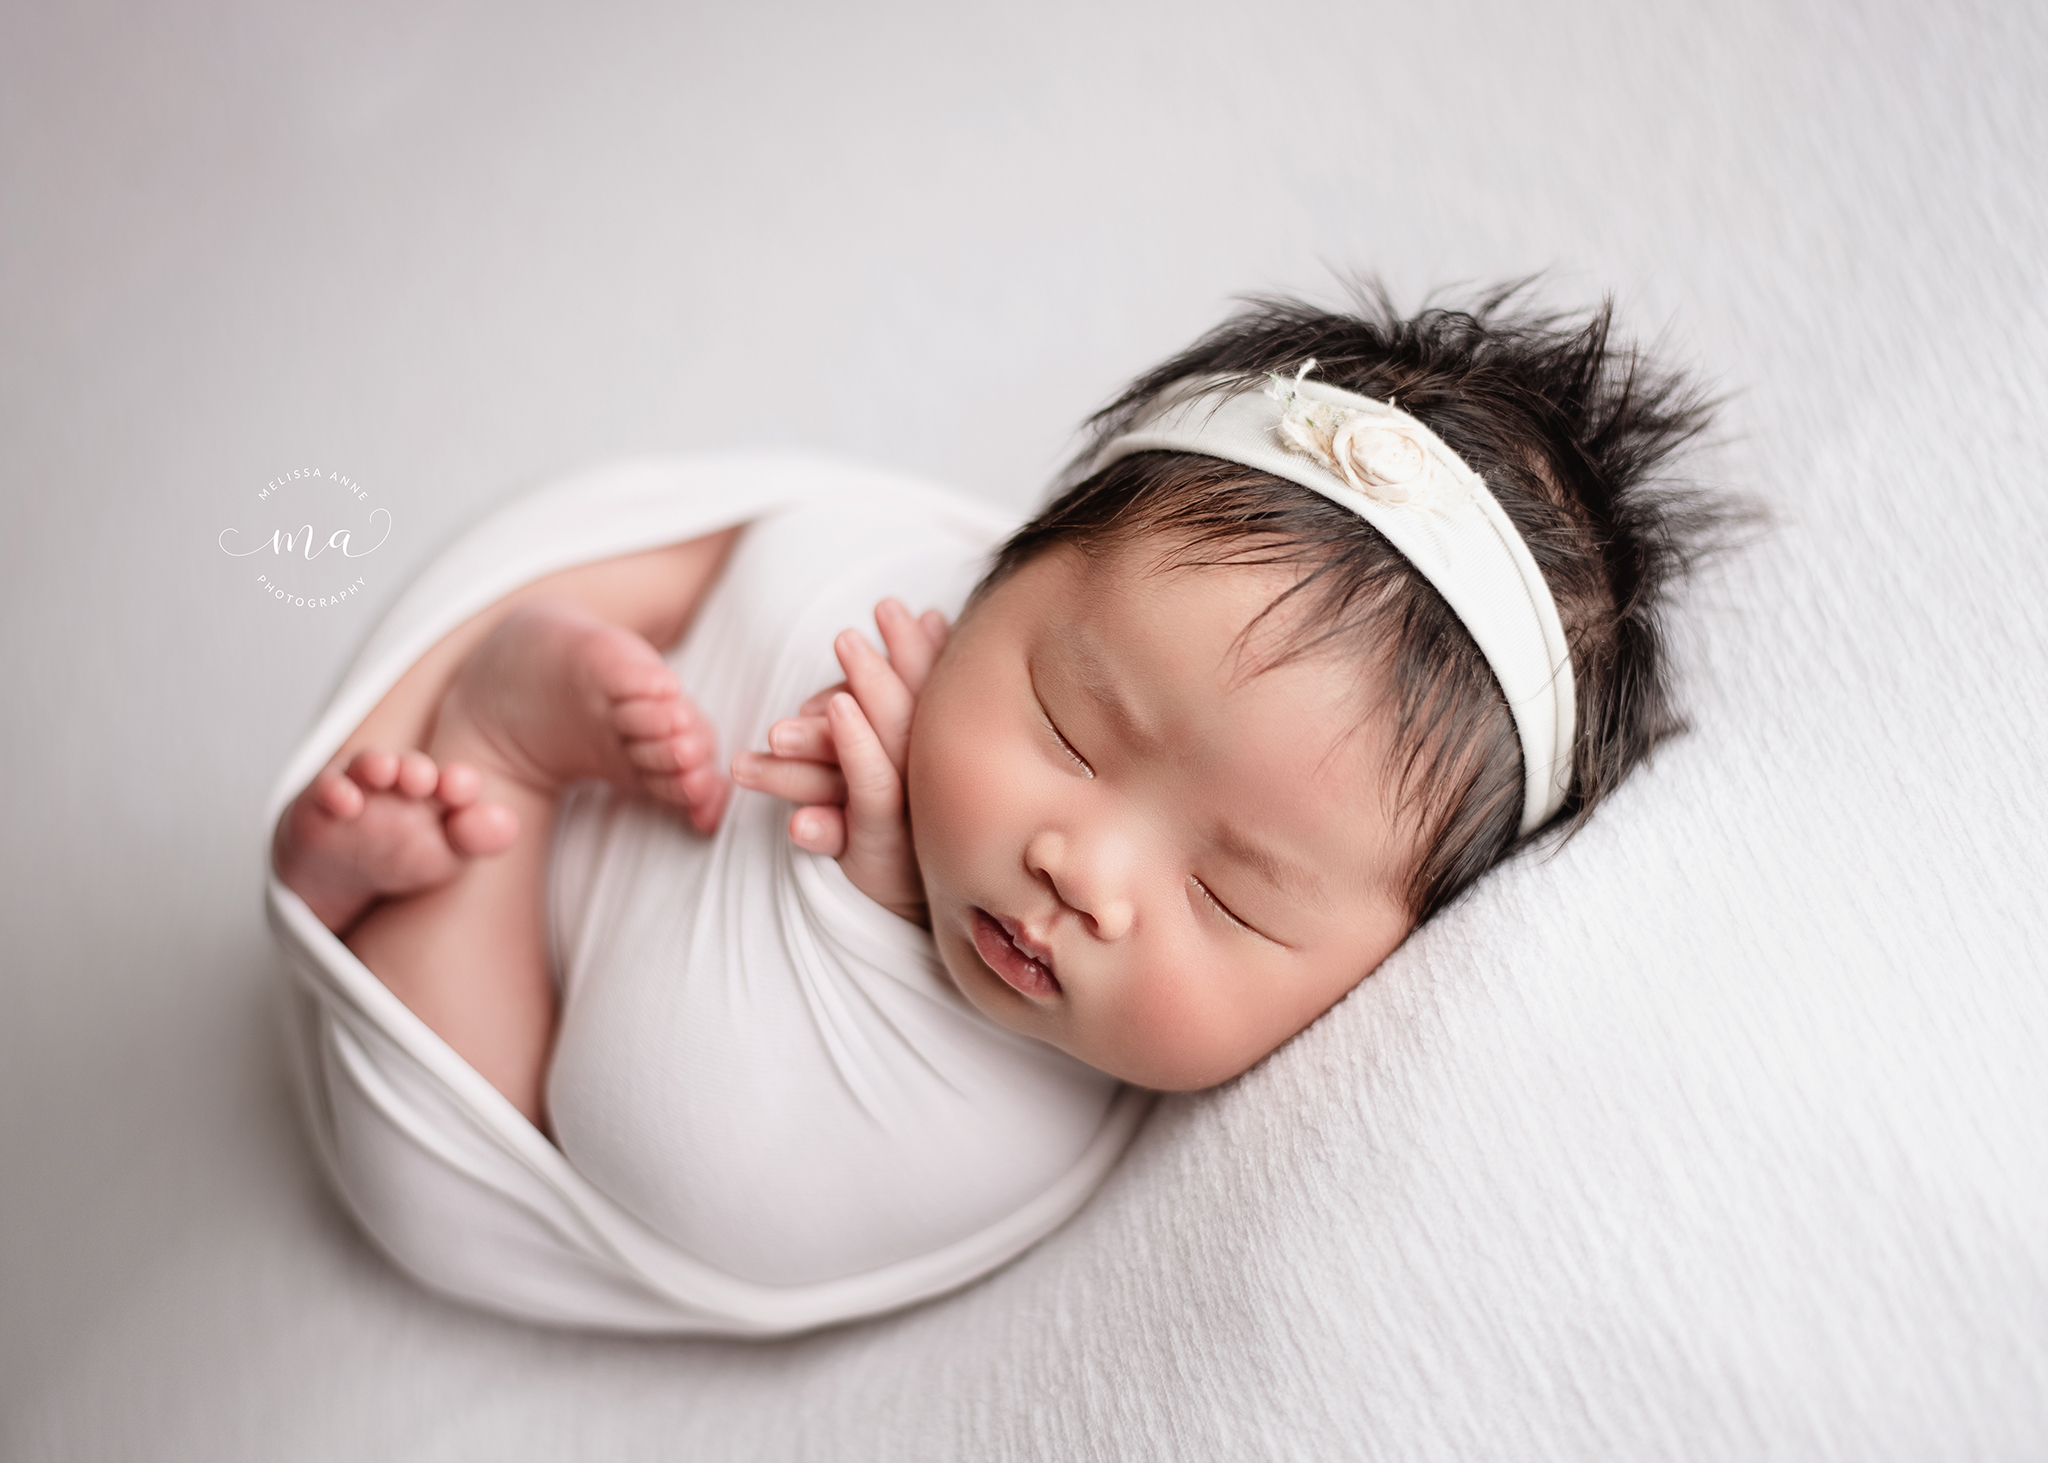 Family Photography Inspiration – Posing with Babies - The Milky Way